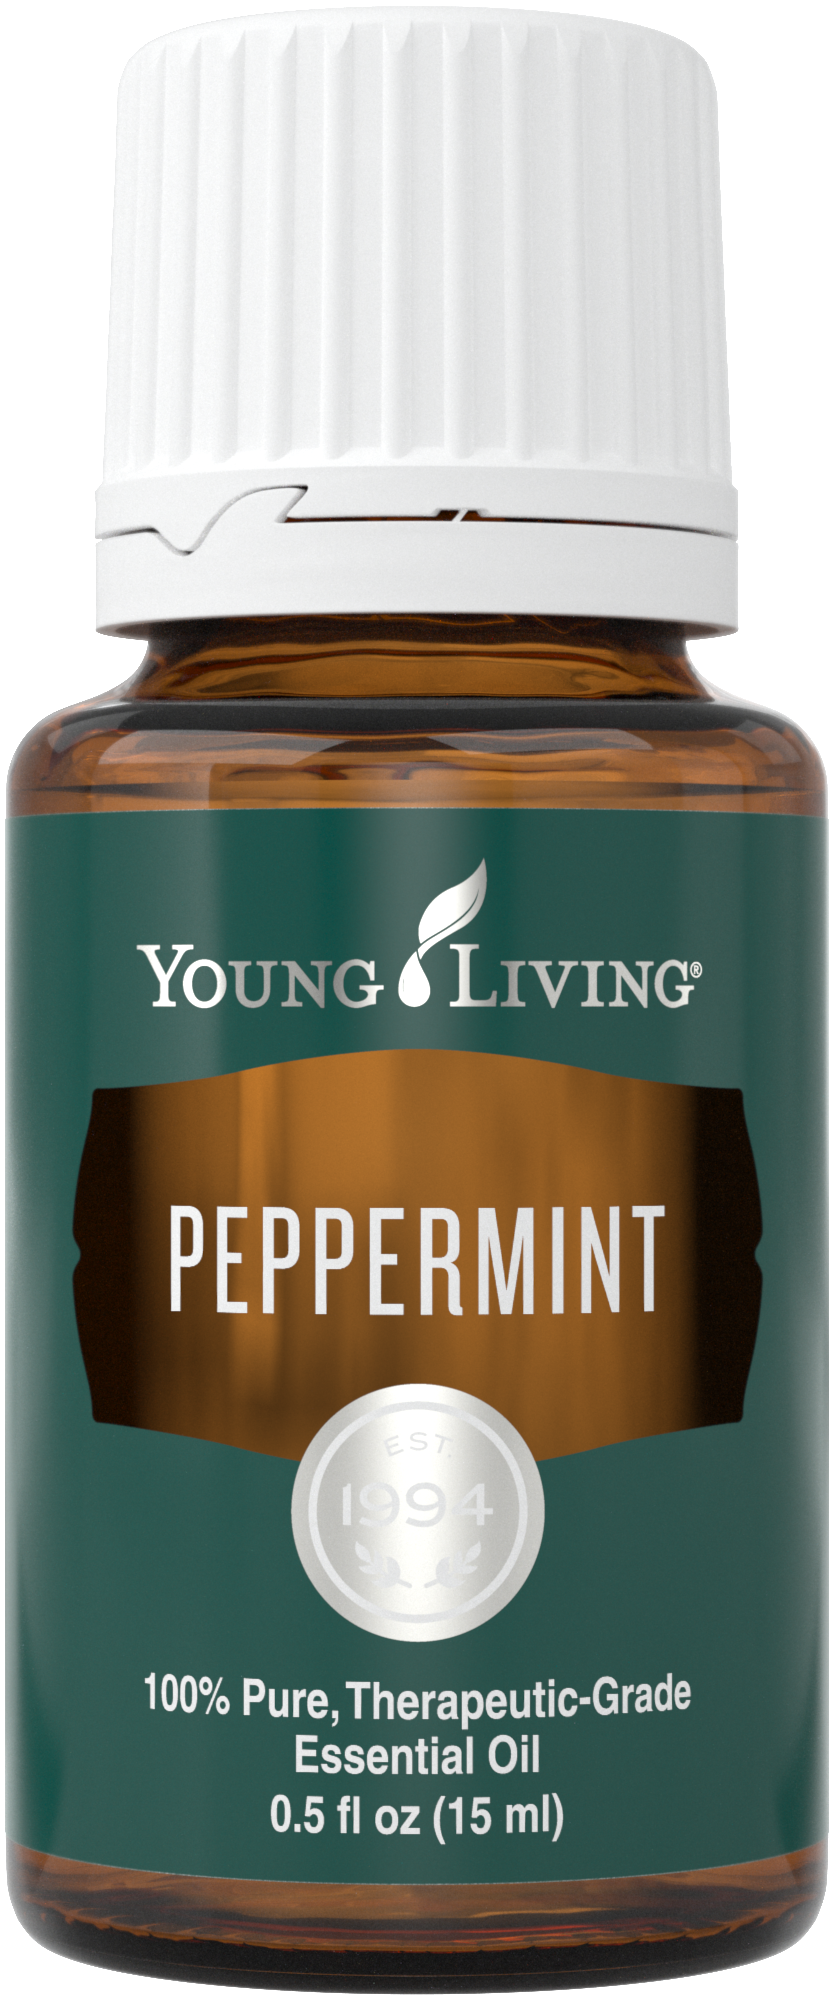 how to use peppermint essential oil for headaches LMC3614